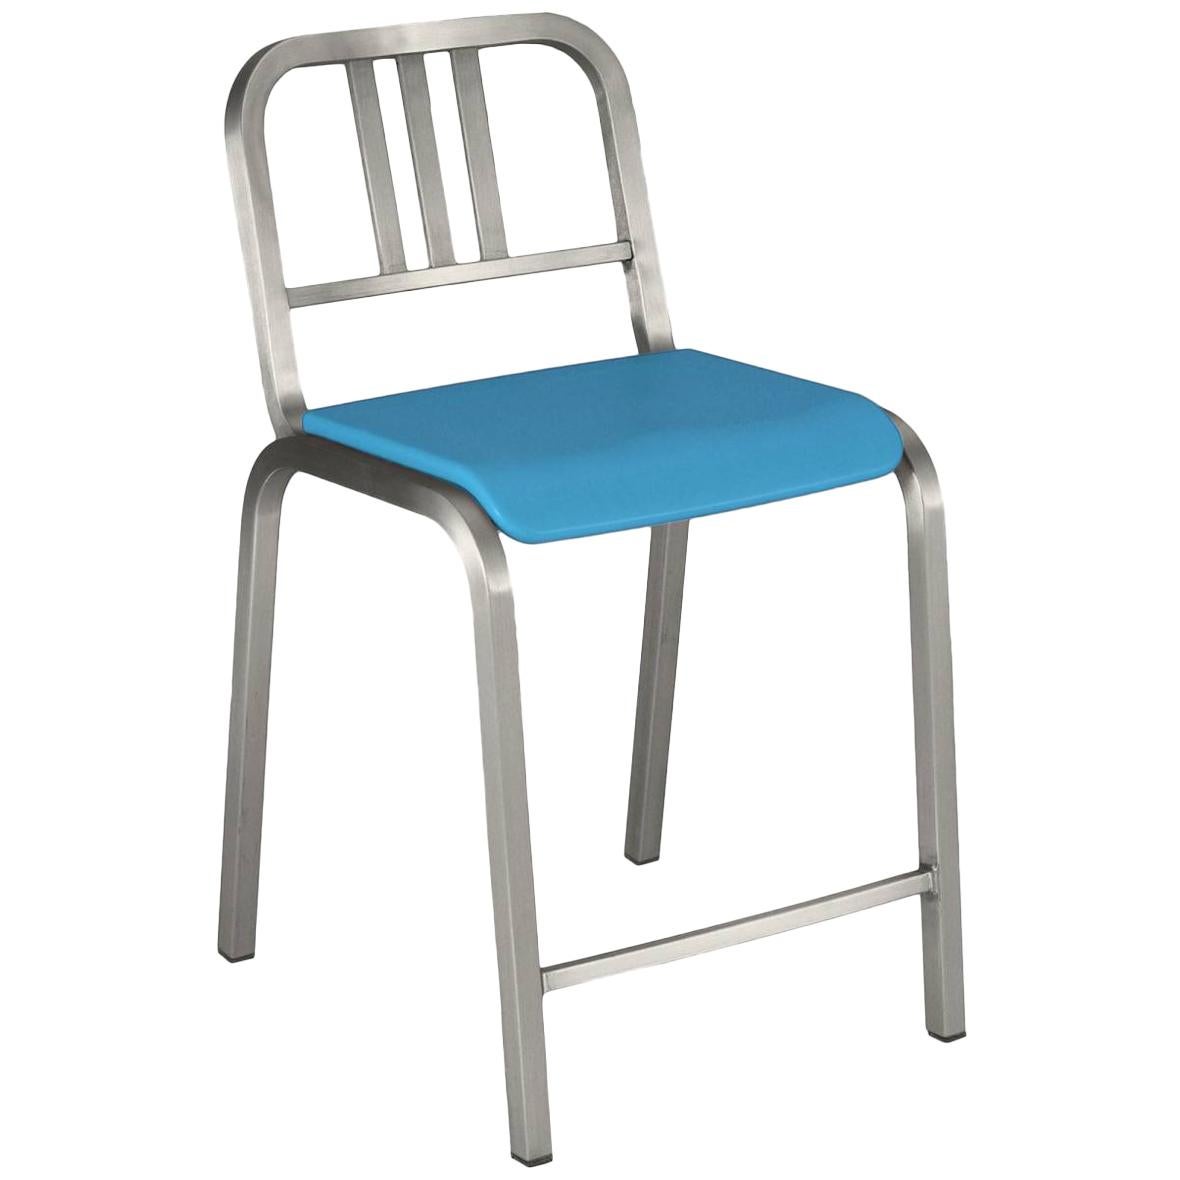 Emeco Nine-0™ Counter Stool in Brushed Aluminum with Blue Seat, Ettore Sottsass